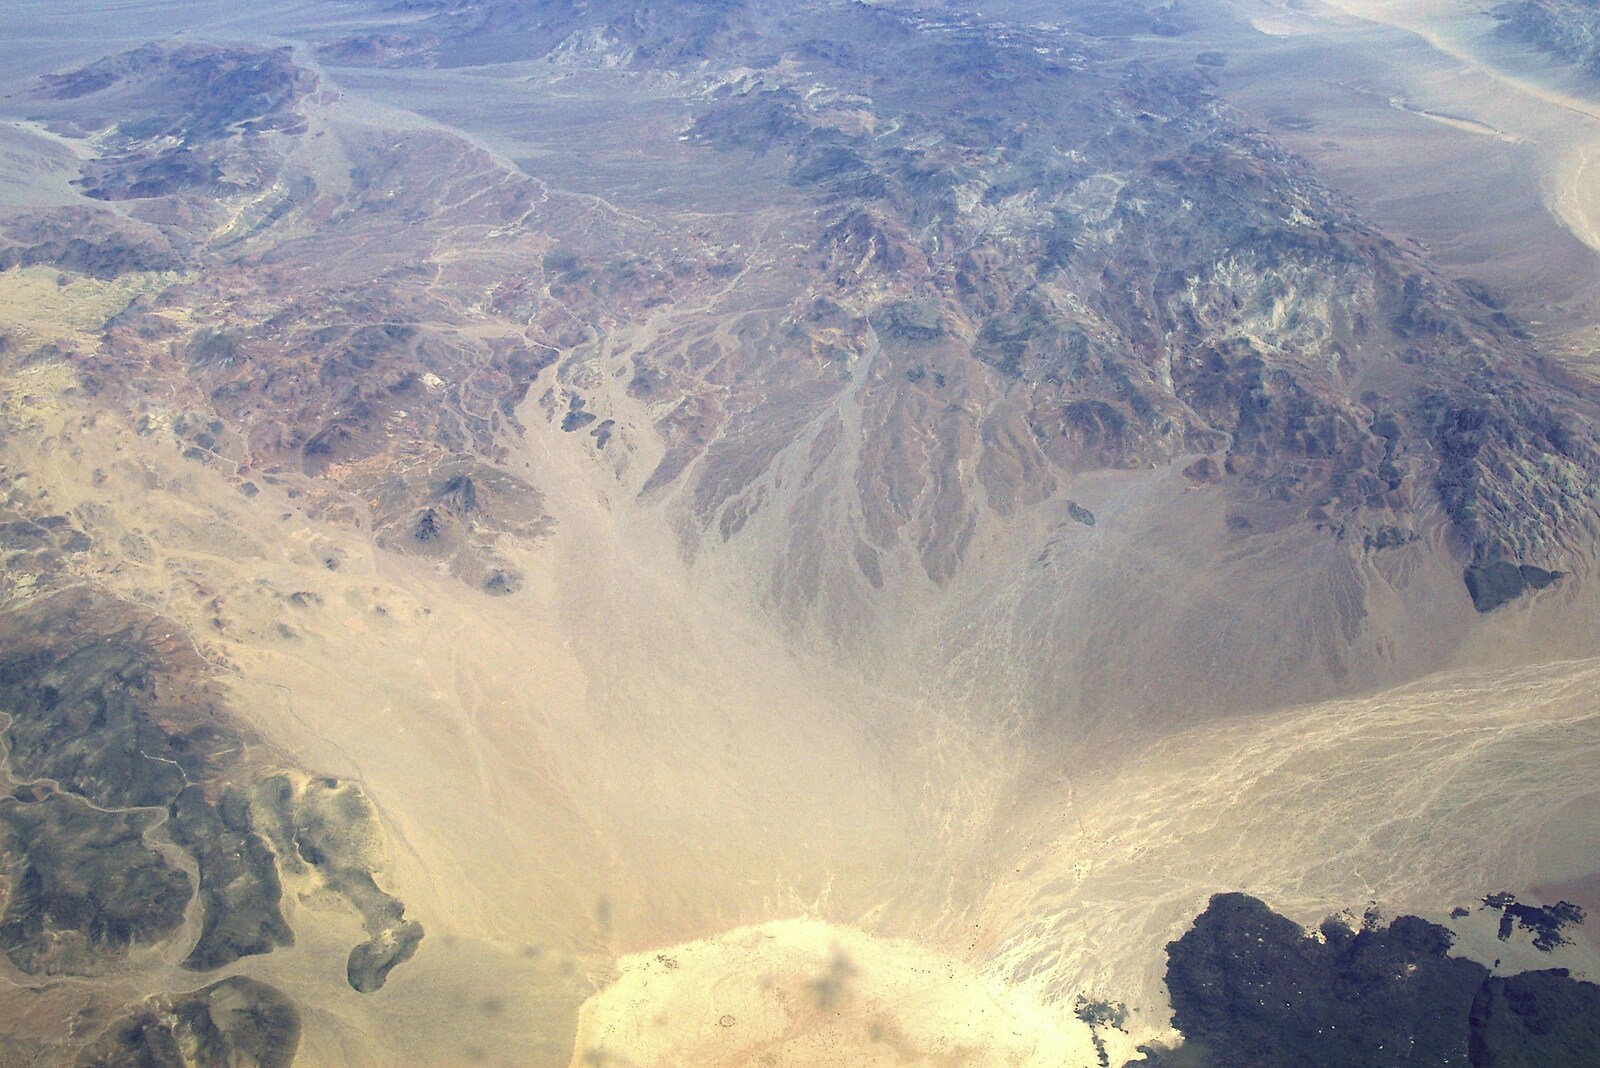 Aerial view over the California desert from San Diego Seven: The Desert and the Dunes, Arizona and California, US - 22nd April